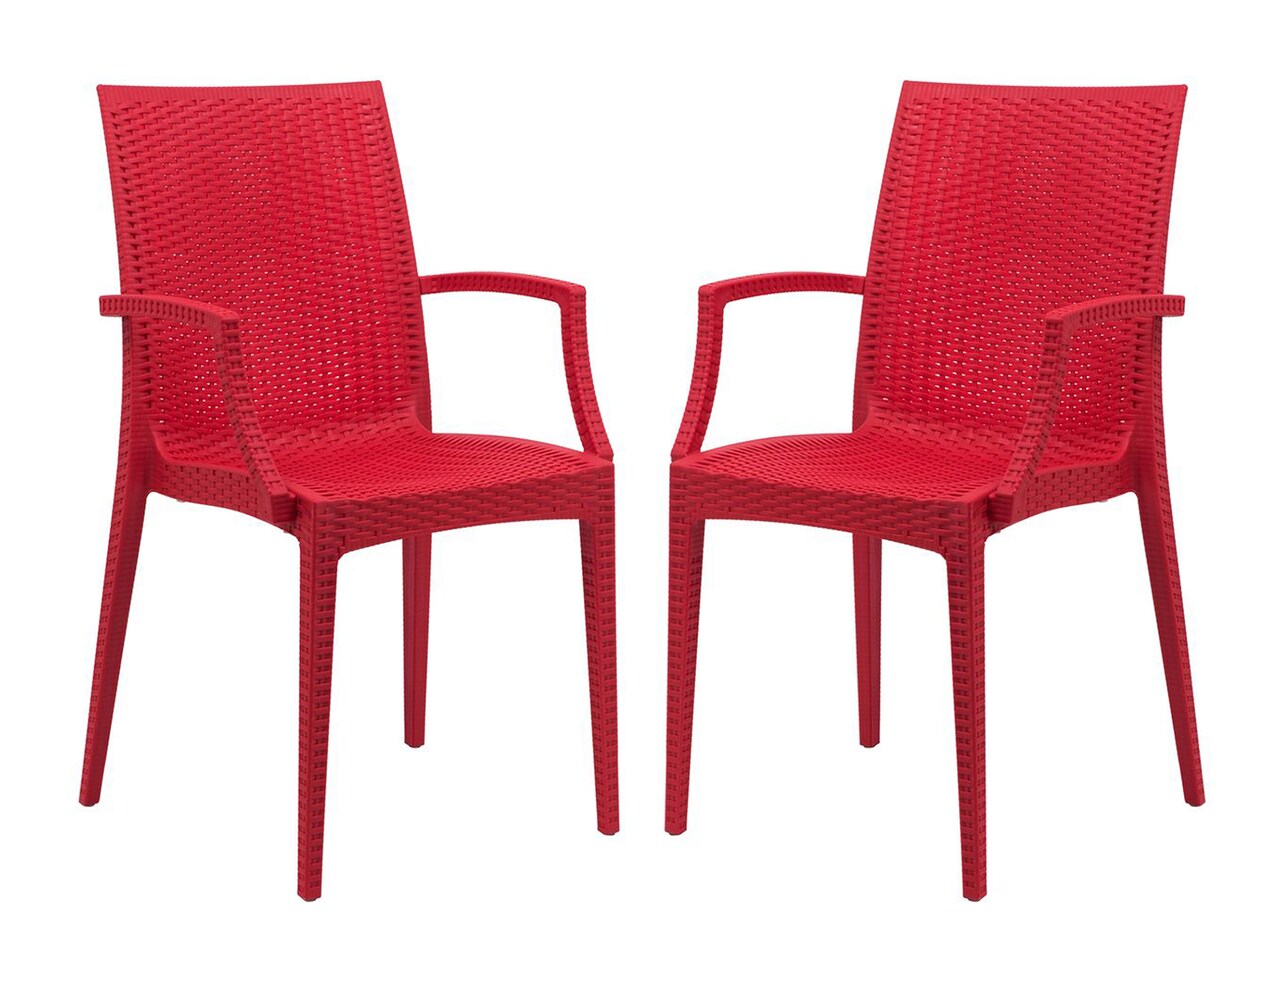 LeisureMod Weave Mace Indoor/Outdoor Chair (With Arms), Set of 2